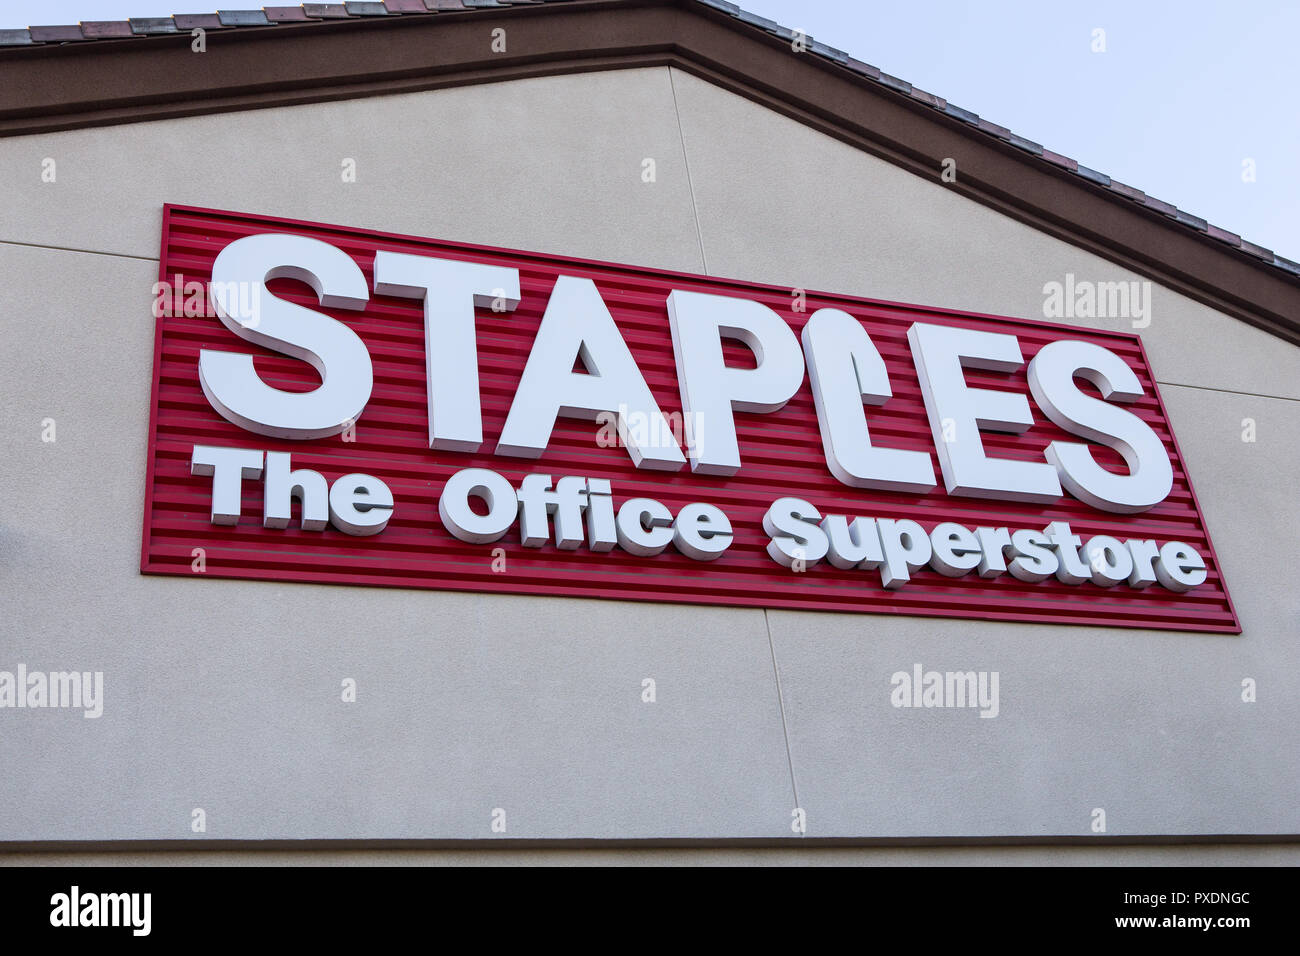 Staples office superstore sign. An American multinational office supply retailing corporation Stock Photo